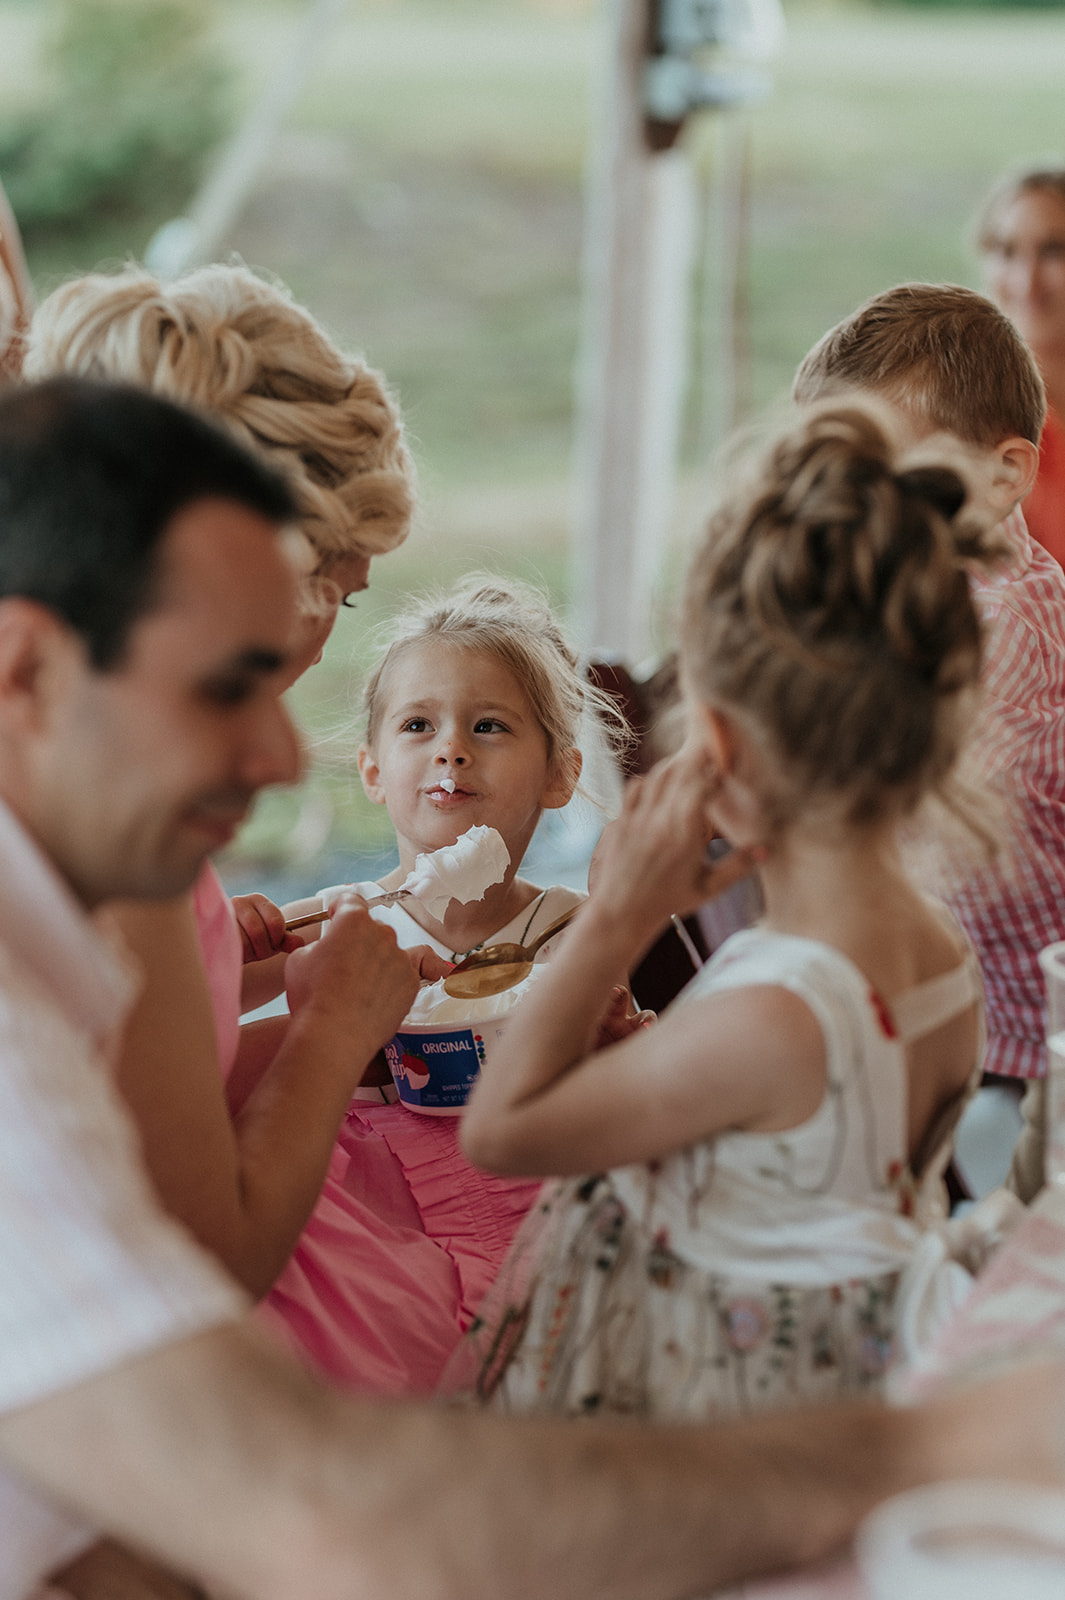 Flower girl eats cool whip during wedding reception